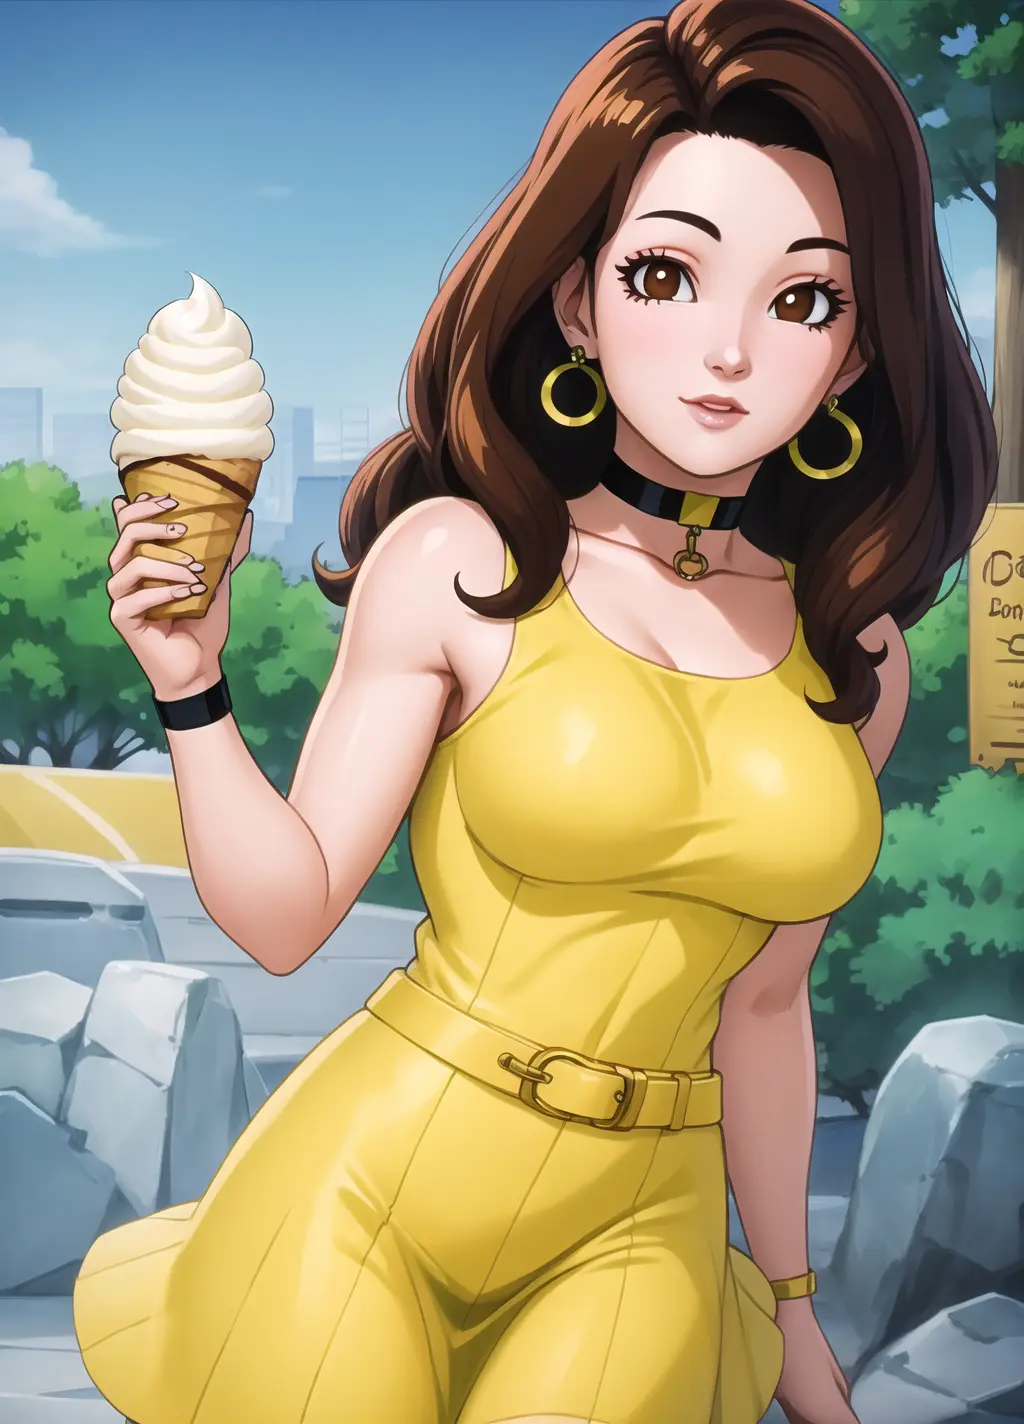 masterpiece, best quality, highest quality, photorealistic, perfect anatomy, perfect face, perfect eyes, earrings, long hair
paresdbgt,yellow dress, brown eyes, choker, belt, innocent, young girl, in park, ice cream